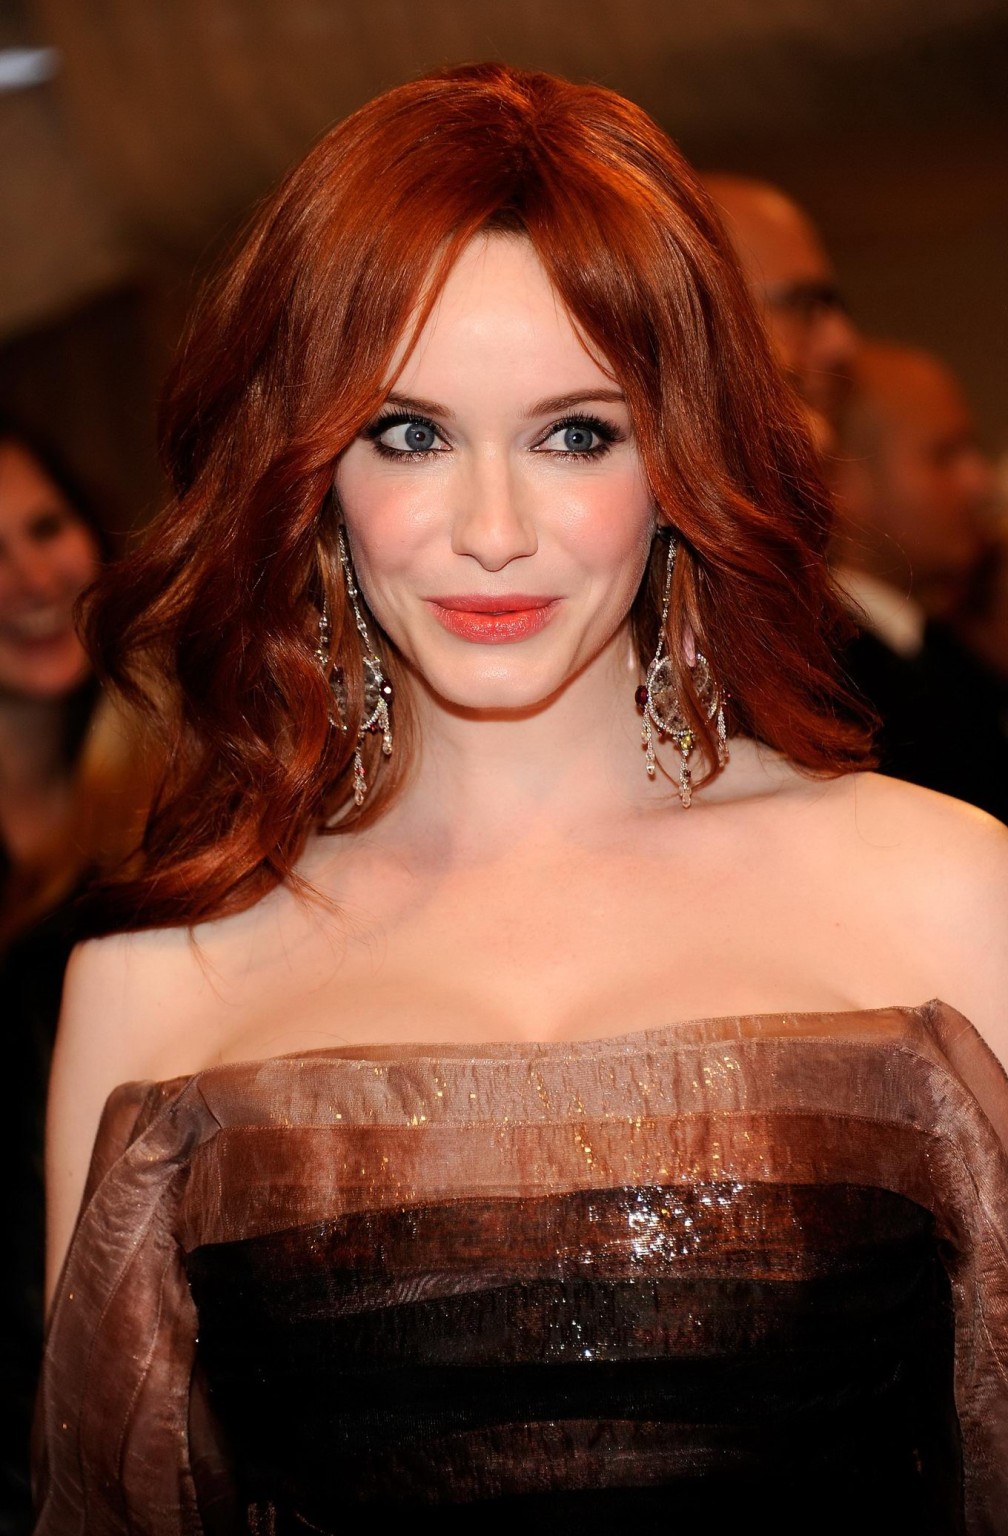 Christina Hendricks Busty Wearing Low Cut Dress At The Benefit Gala In Nyc Porn Pictures Xxx